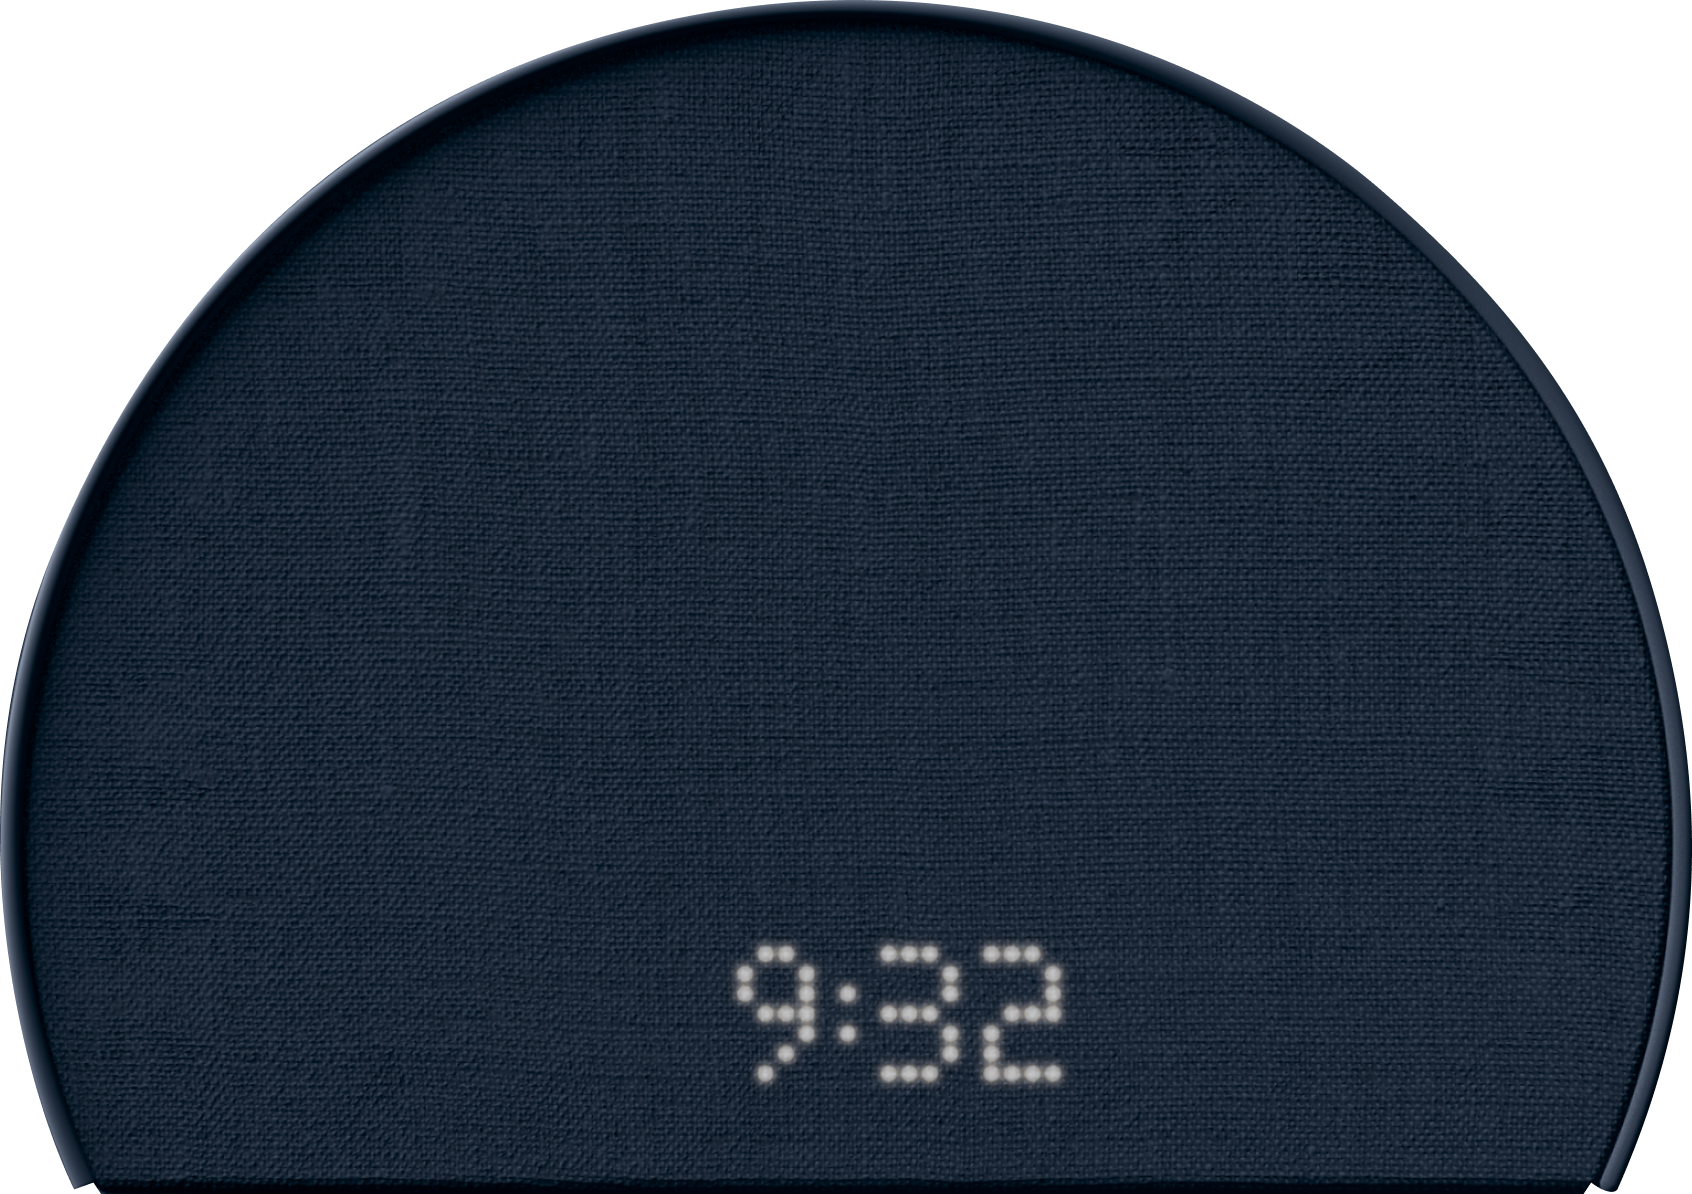 Restore 2 with dimmable clock; clock illuminated